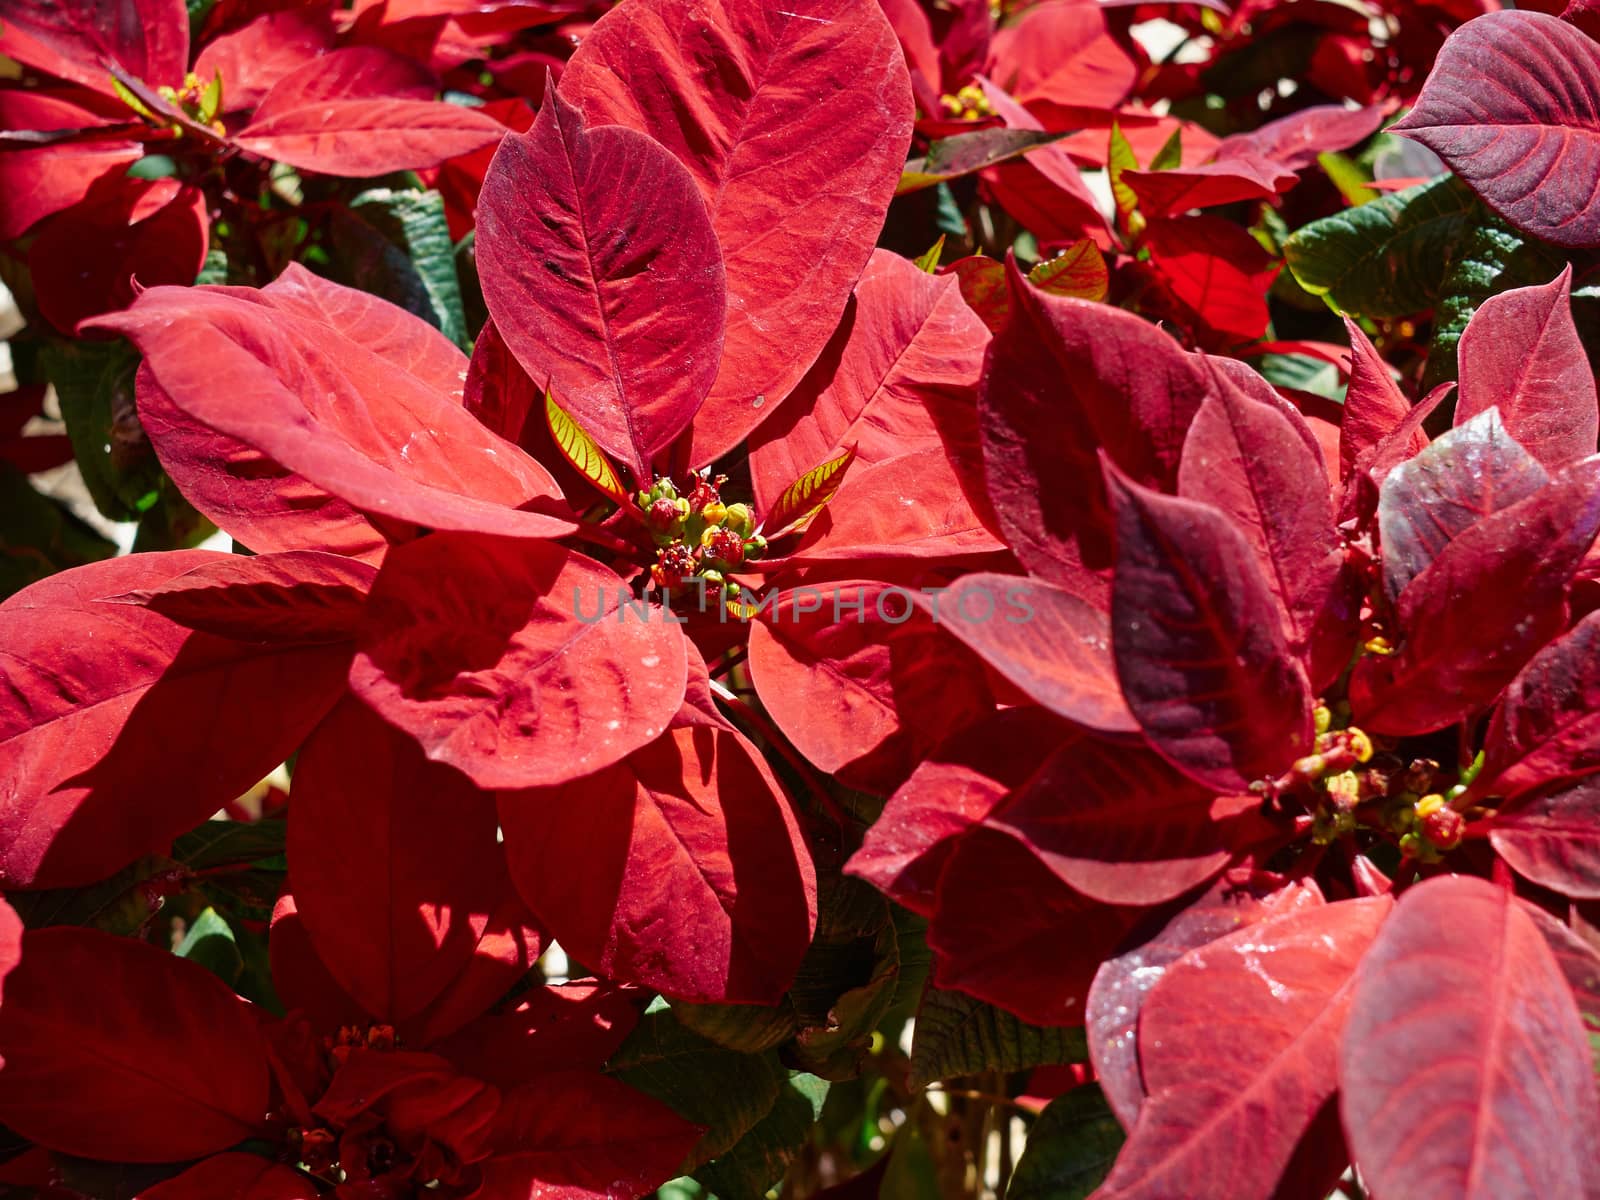 Close up details of blooming red Poinsettia Christmas plant flower